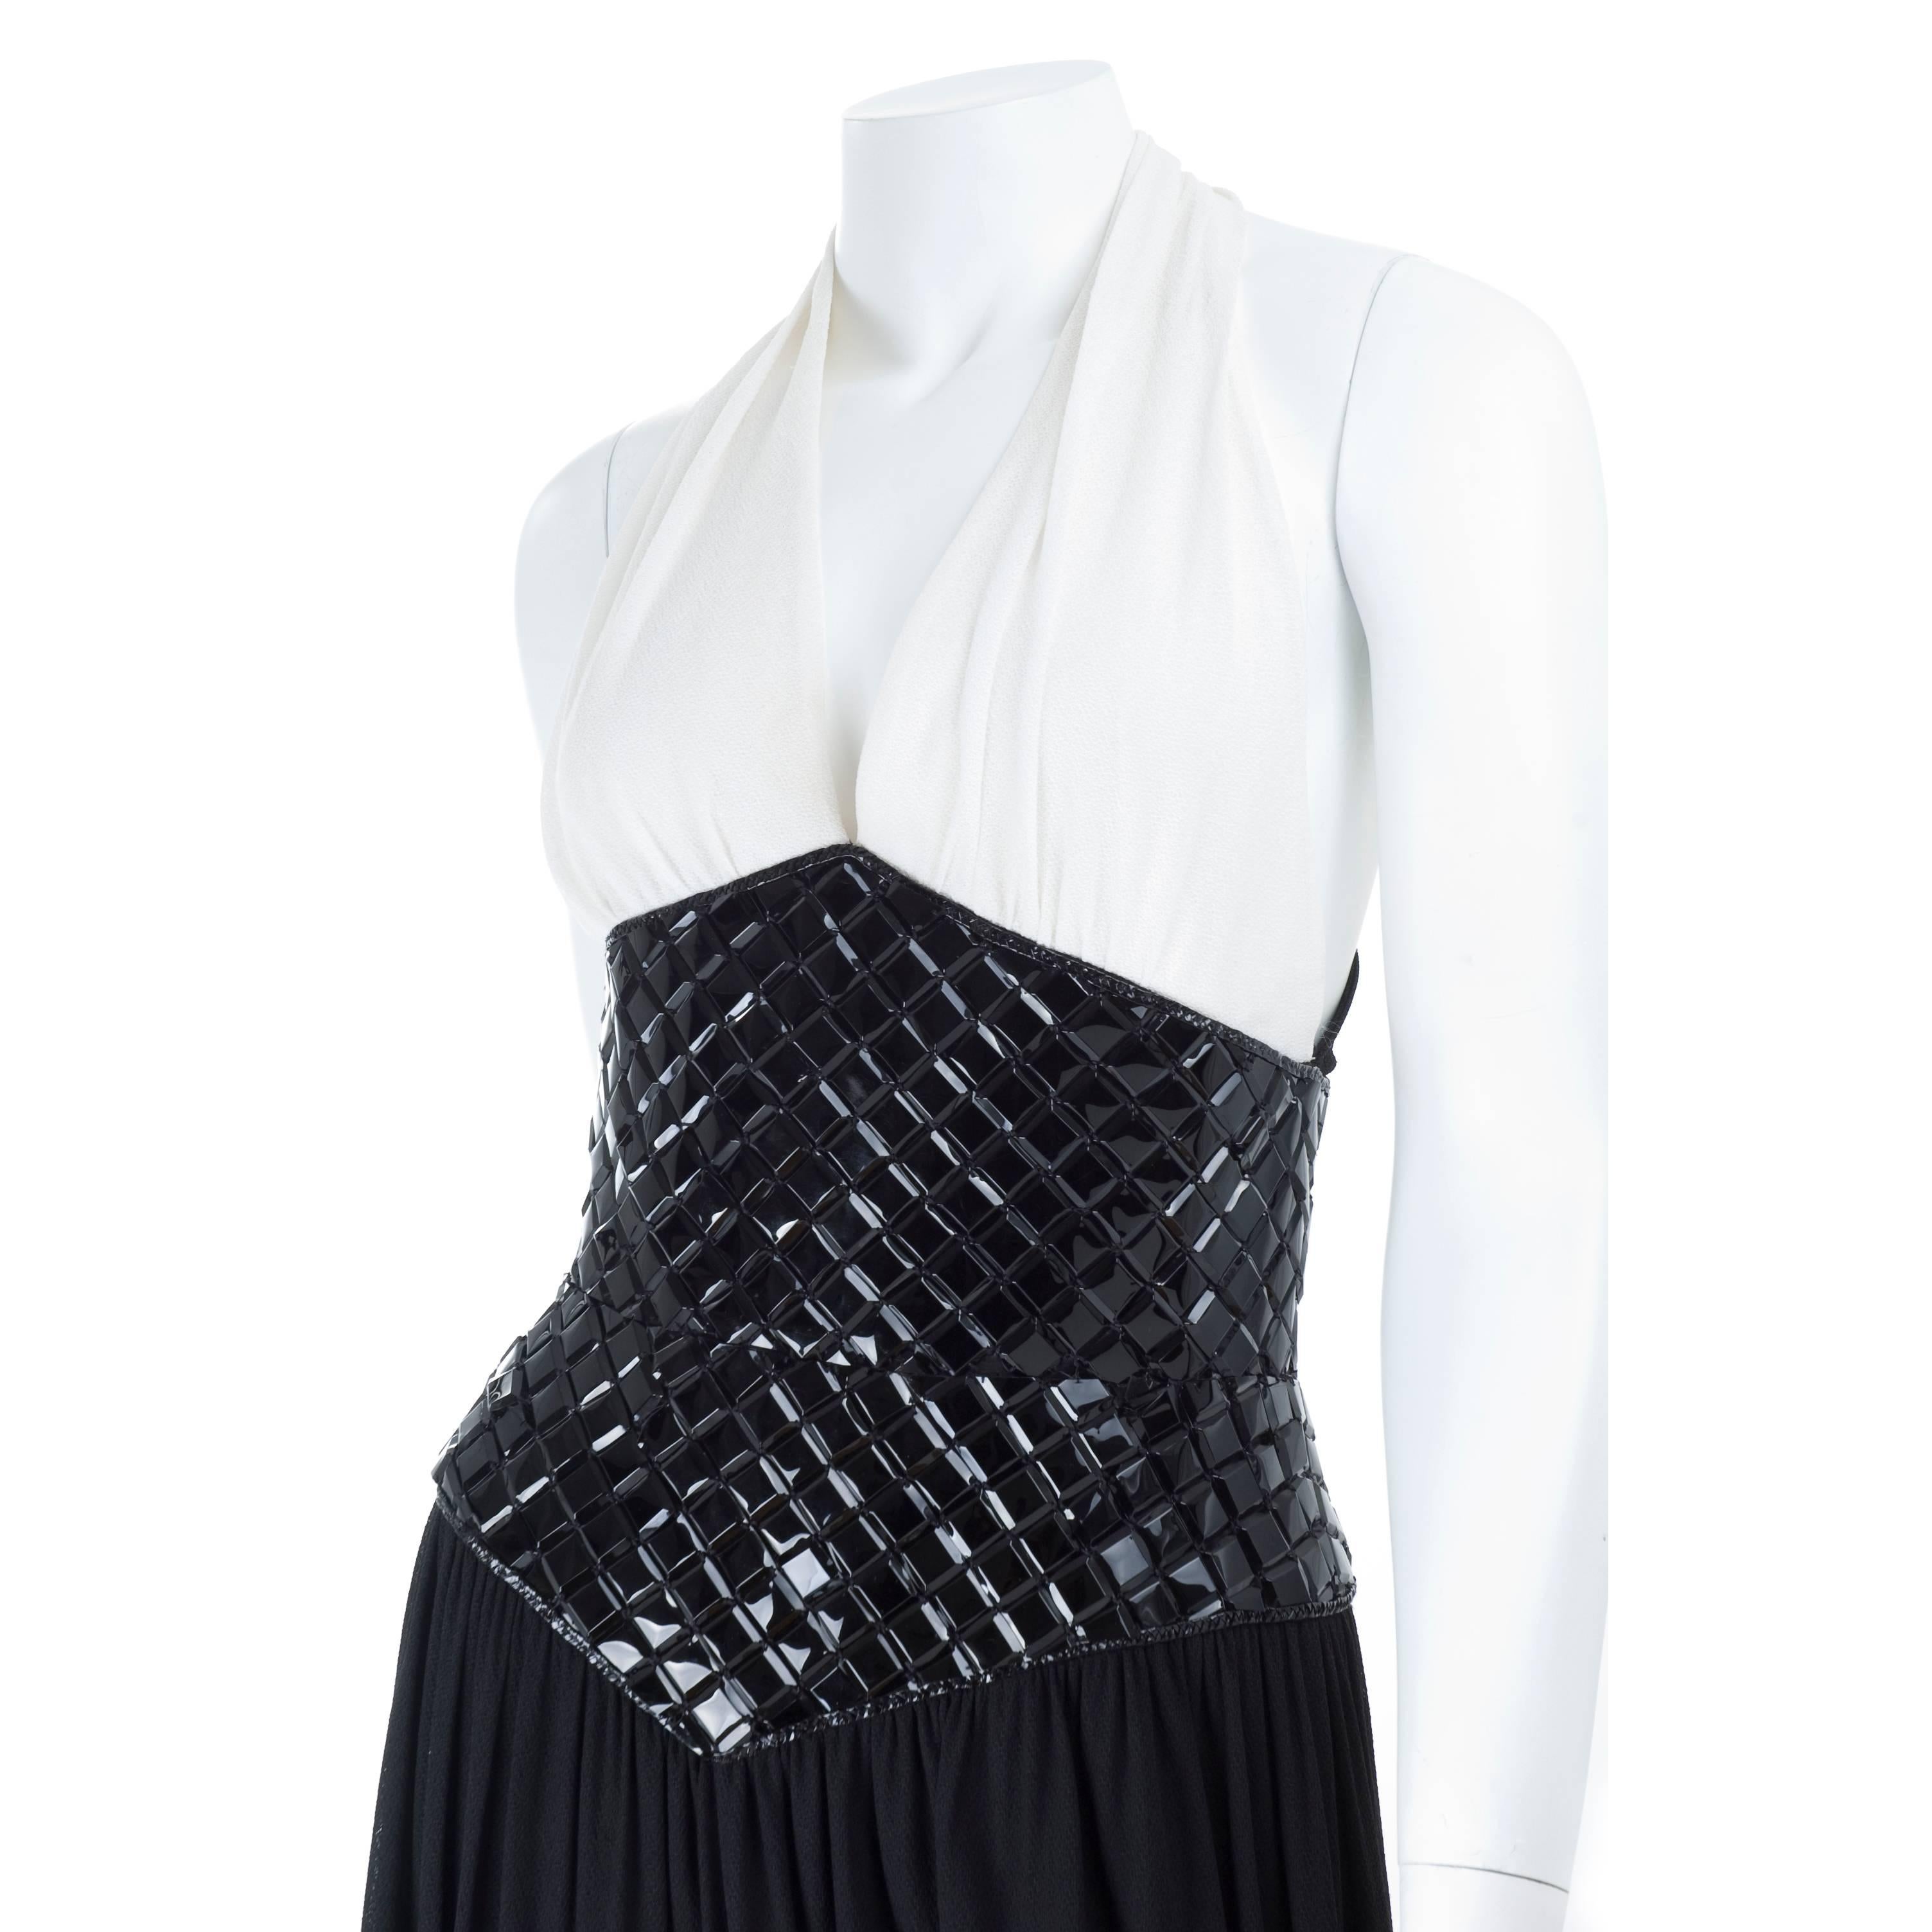 Women's 1995 Vintage Chanel Evening Dress Black & White Documented For Sale